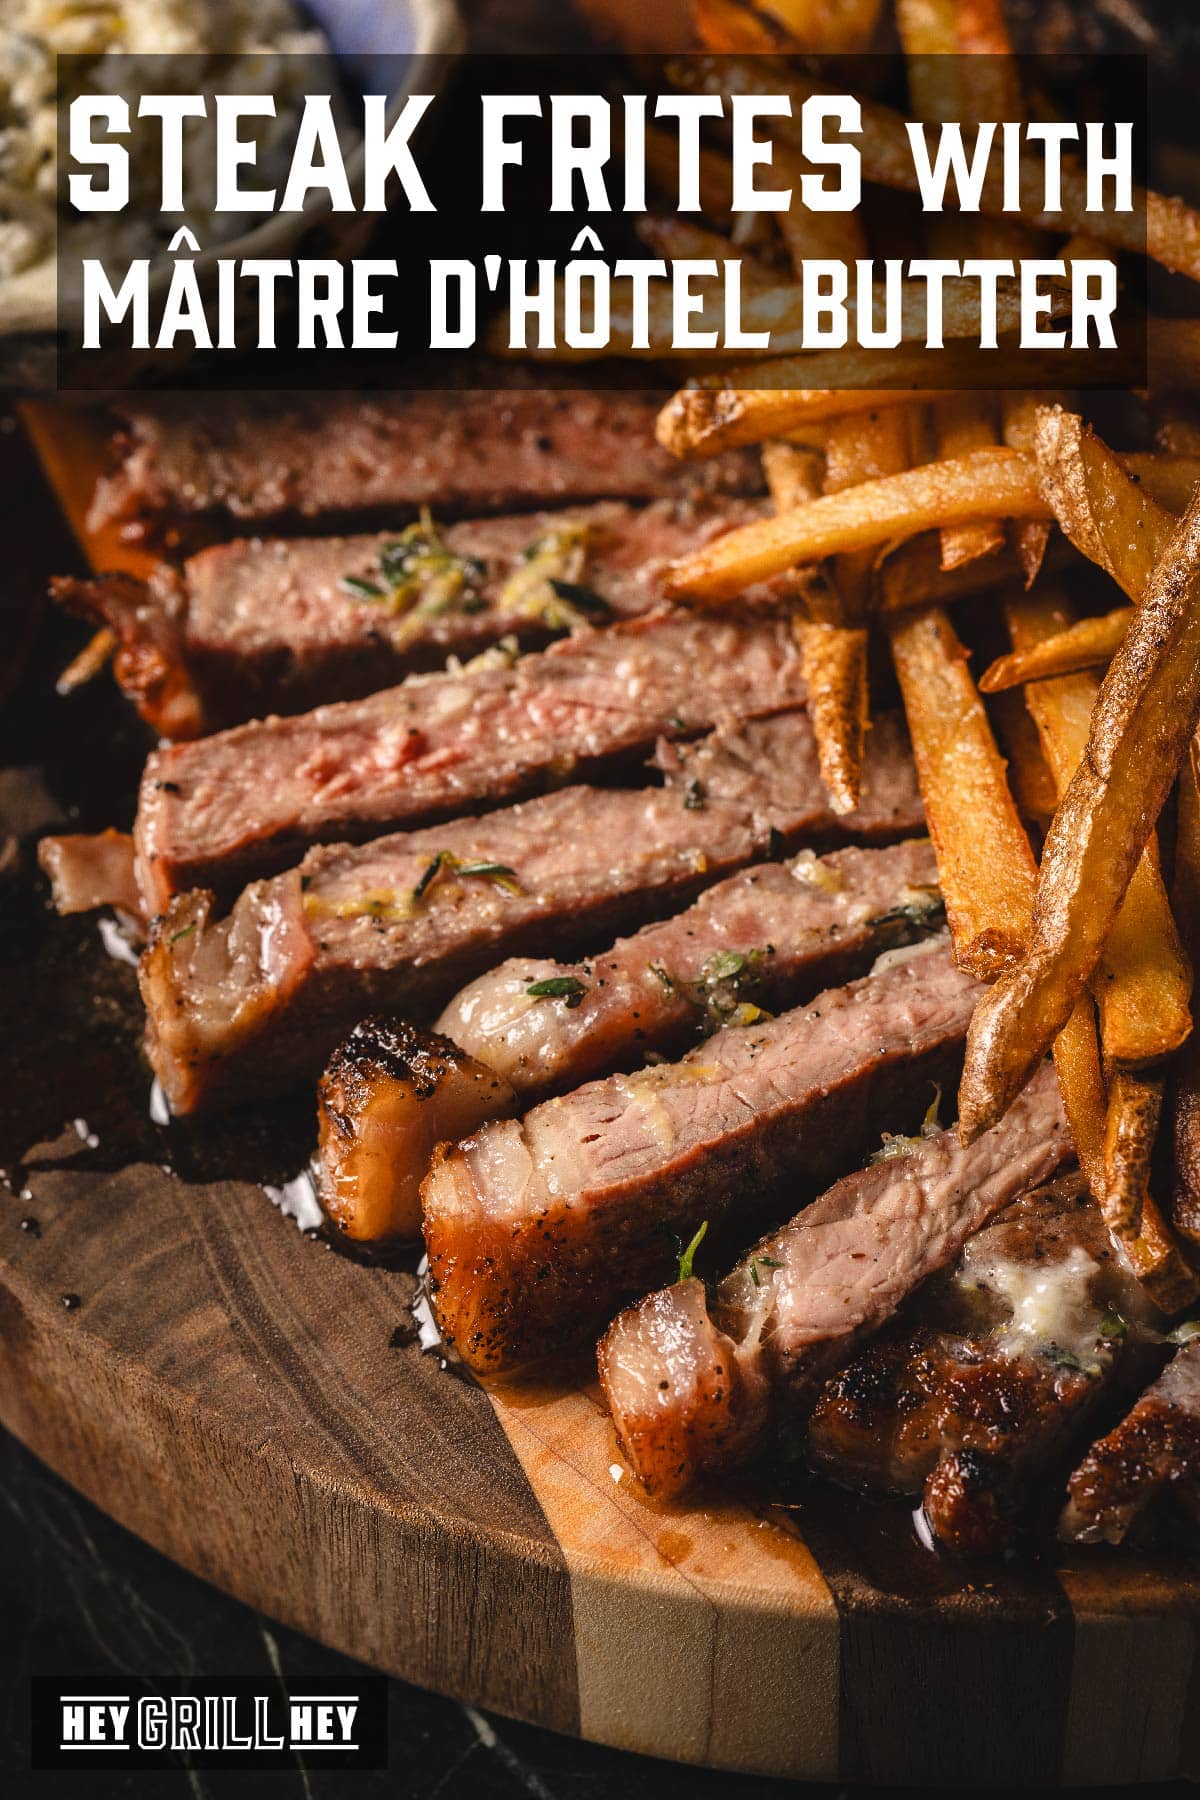 Sliced steak on serving platter with French fries. Text reads "Steak Frites with Mâitre d'Hôtel Butter".